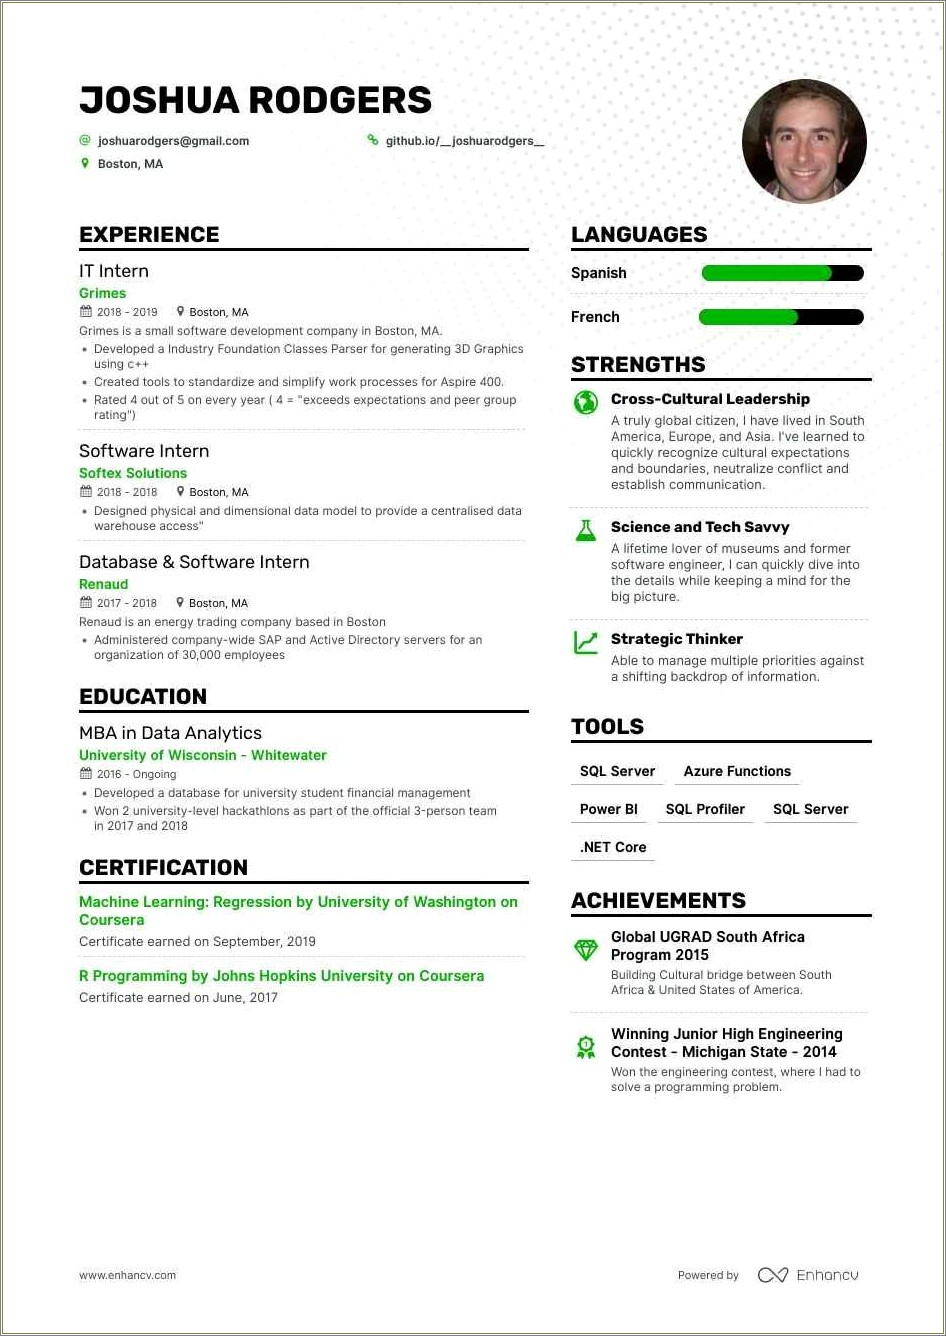 Computer Science Jobs Who Looks At Your Resume